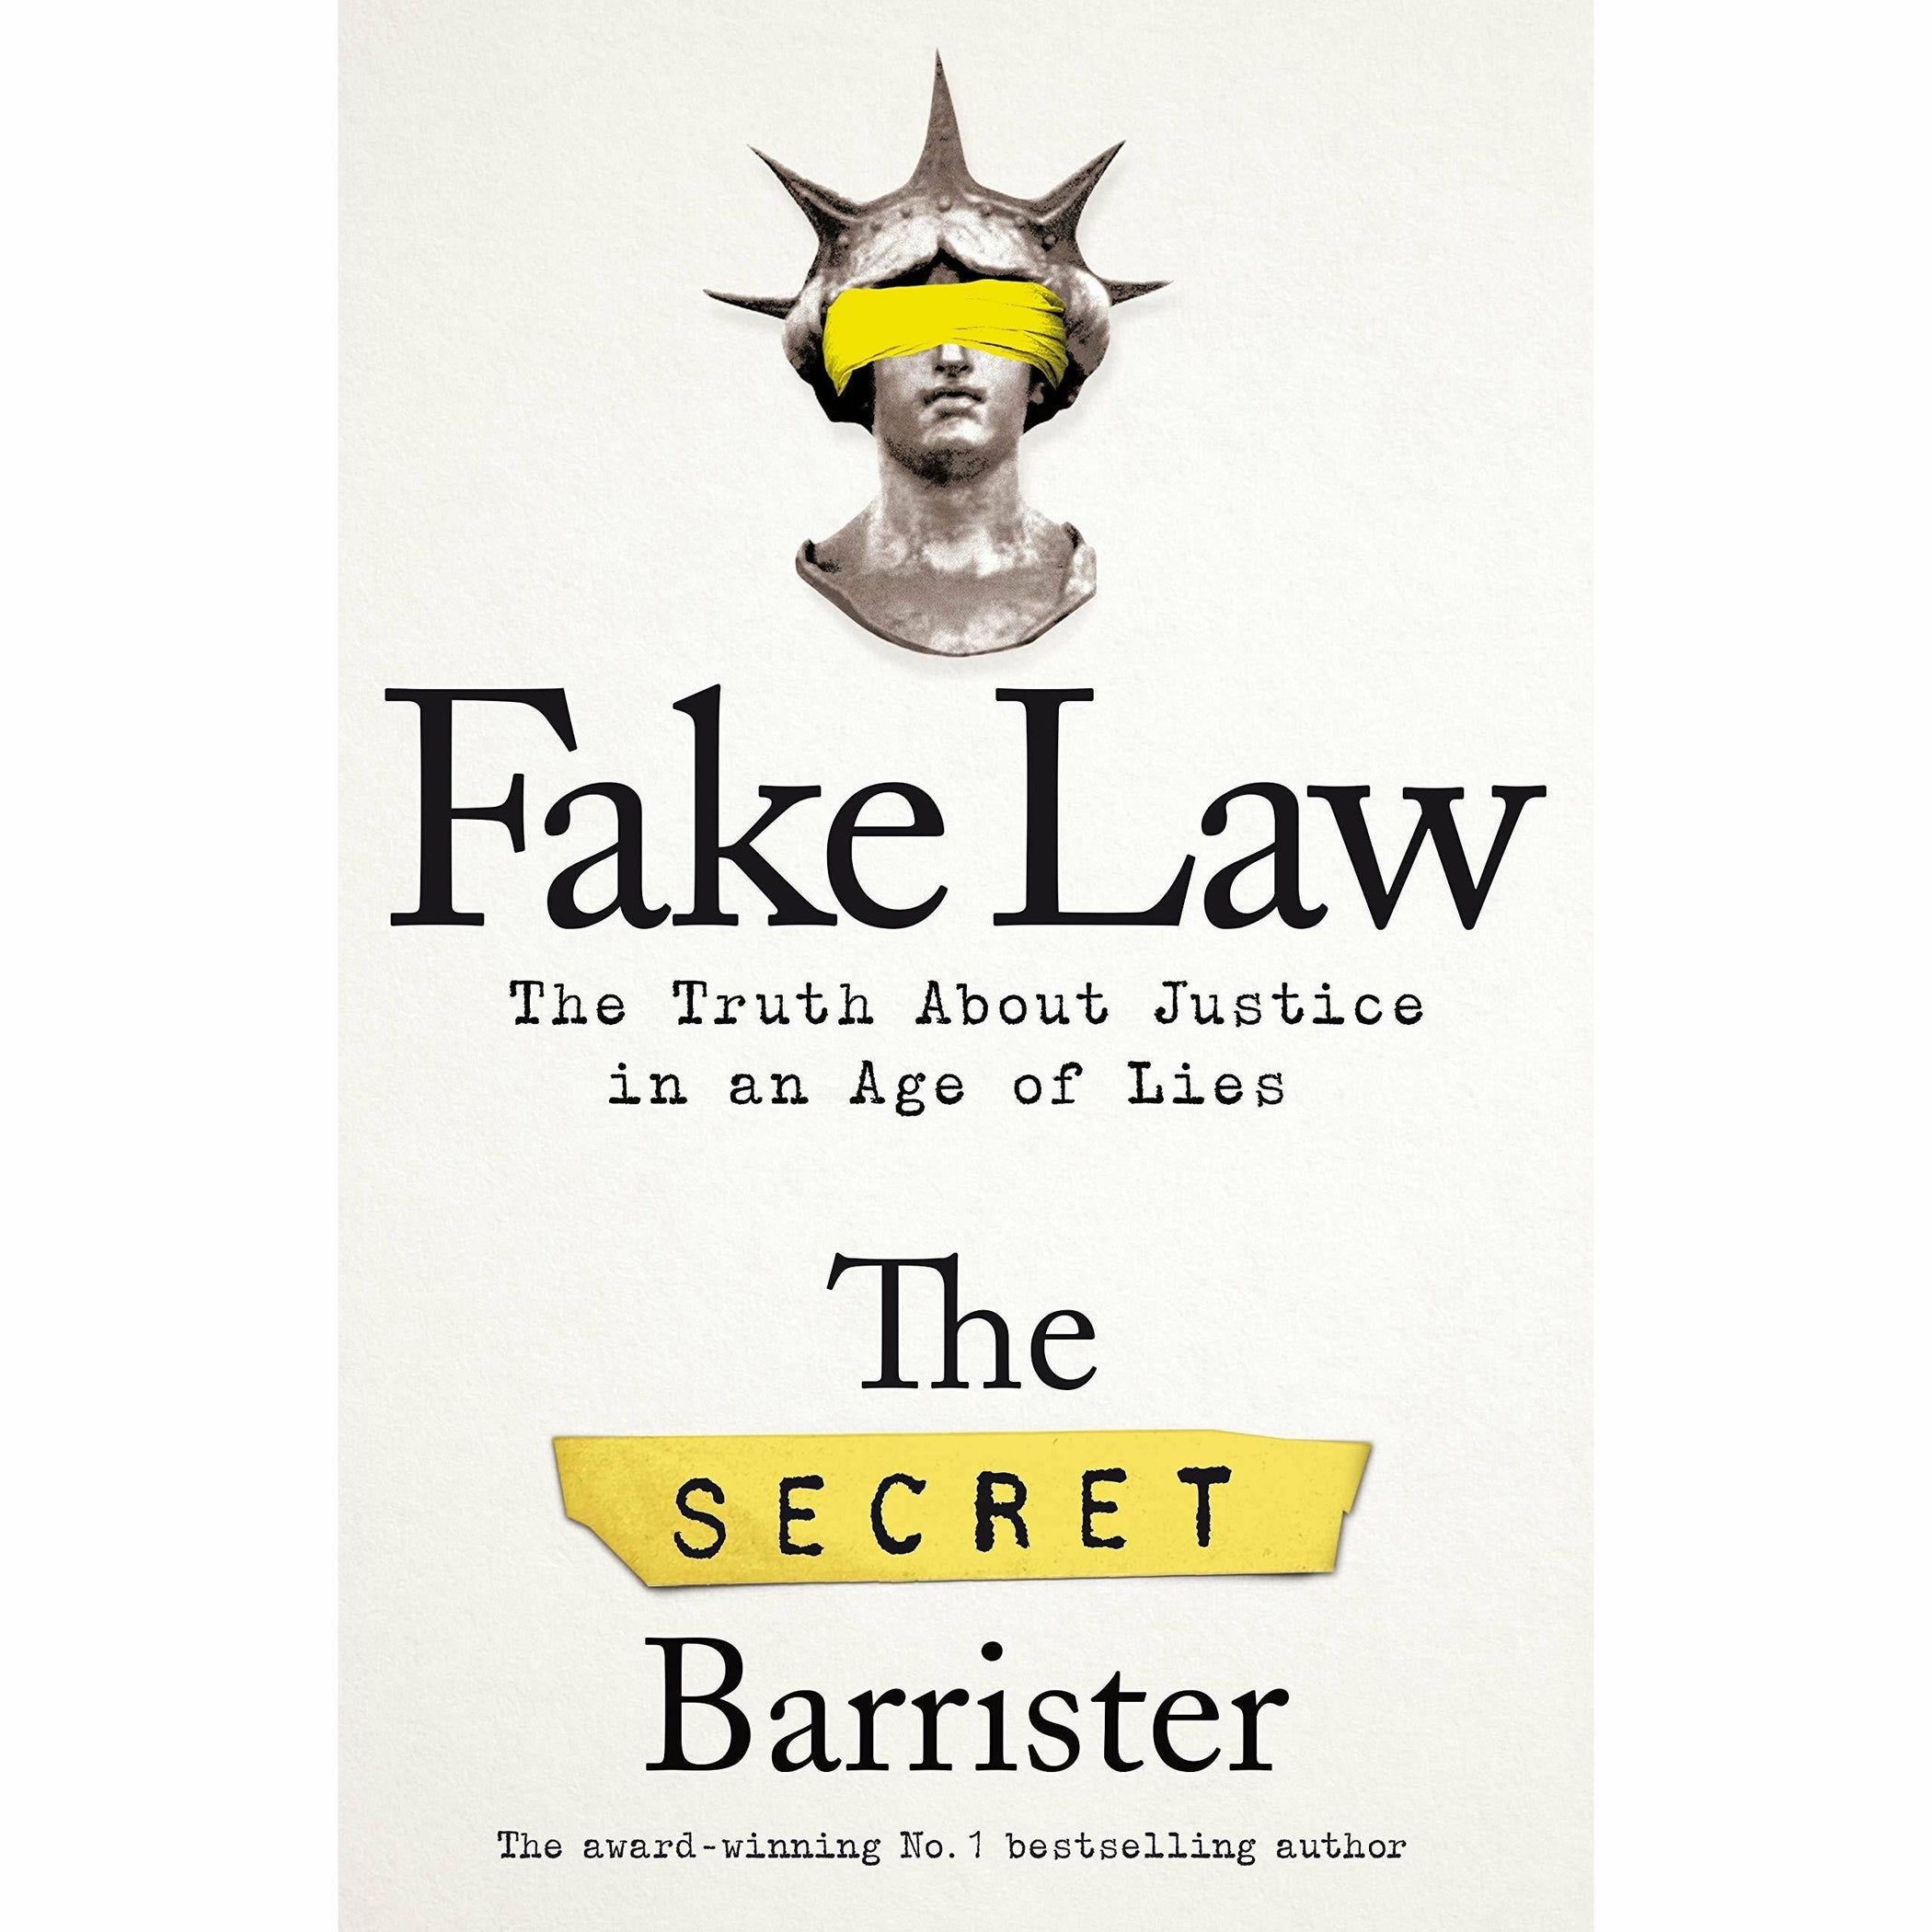 Fake Law by The Secret Barrister